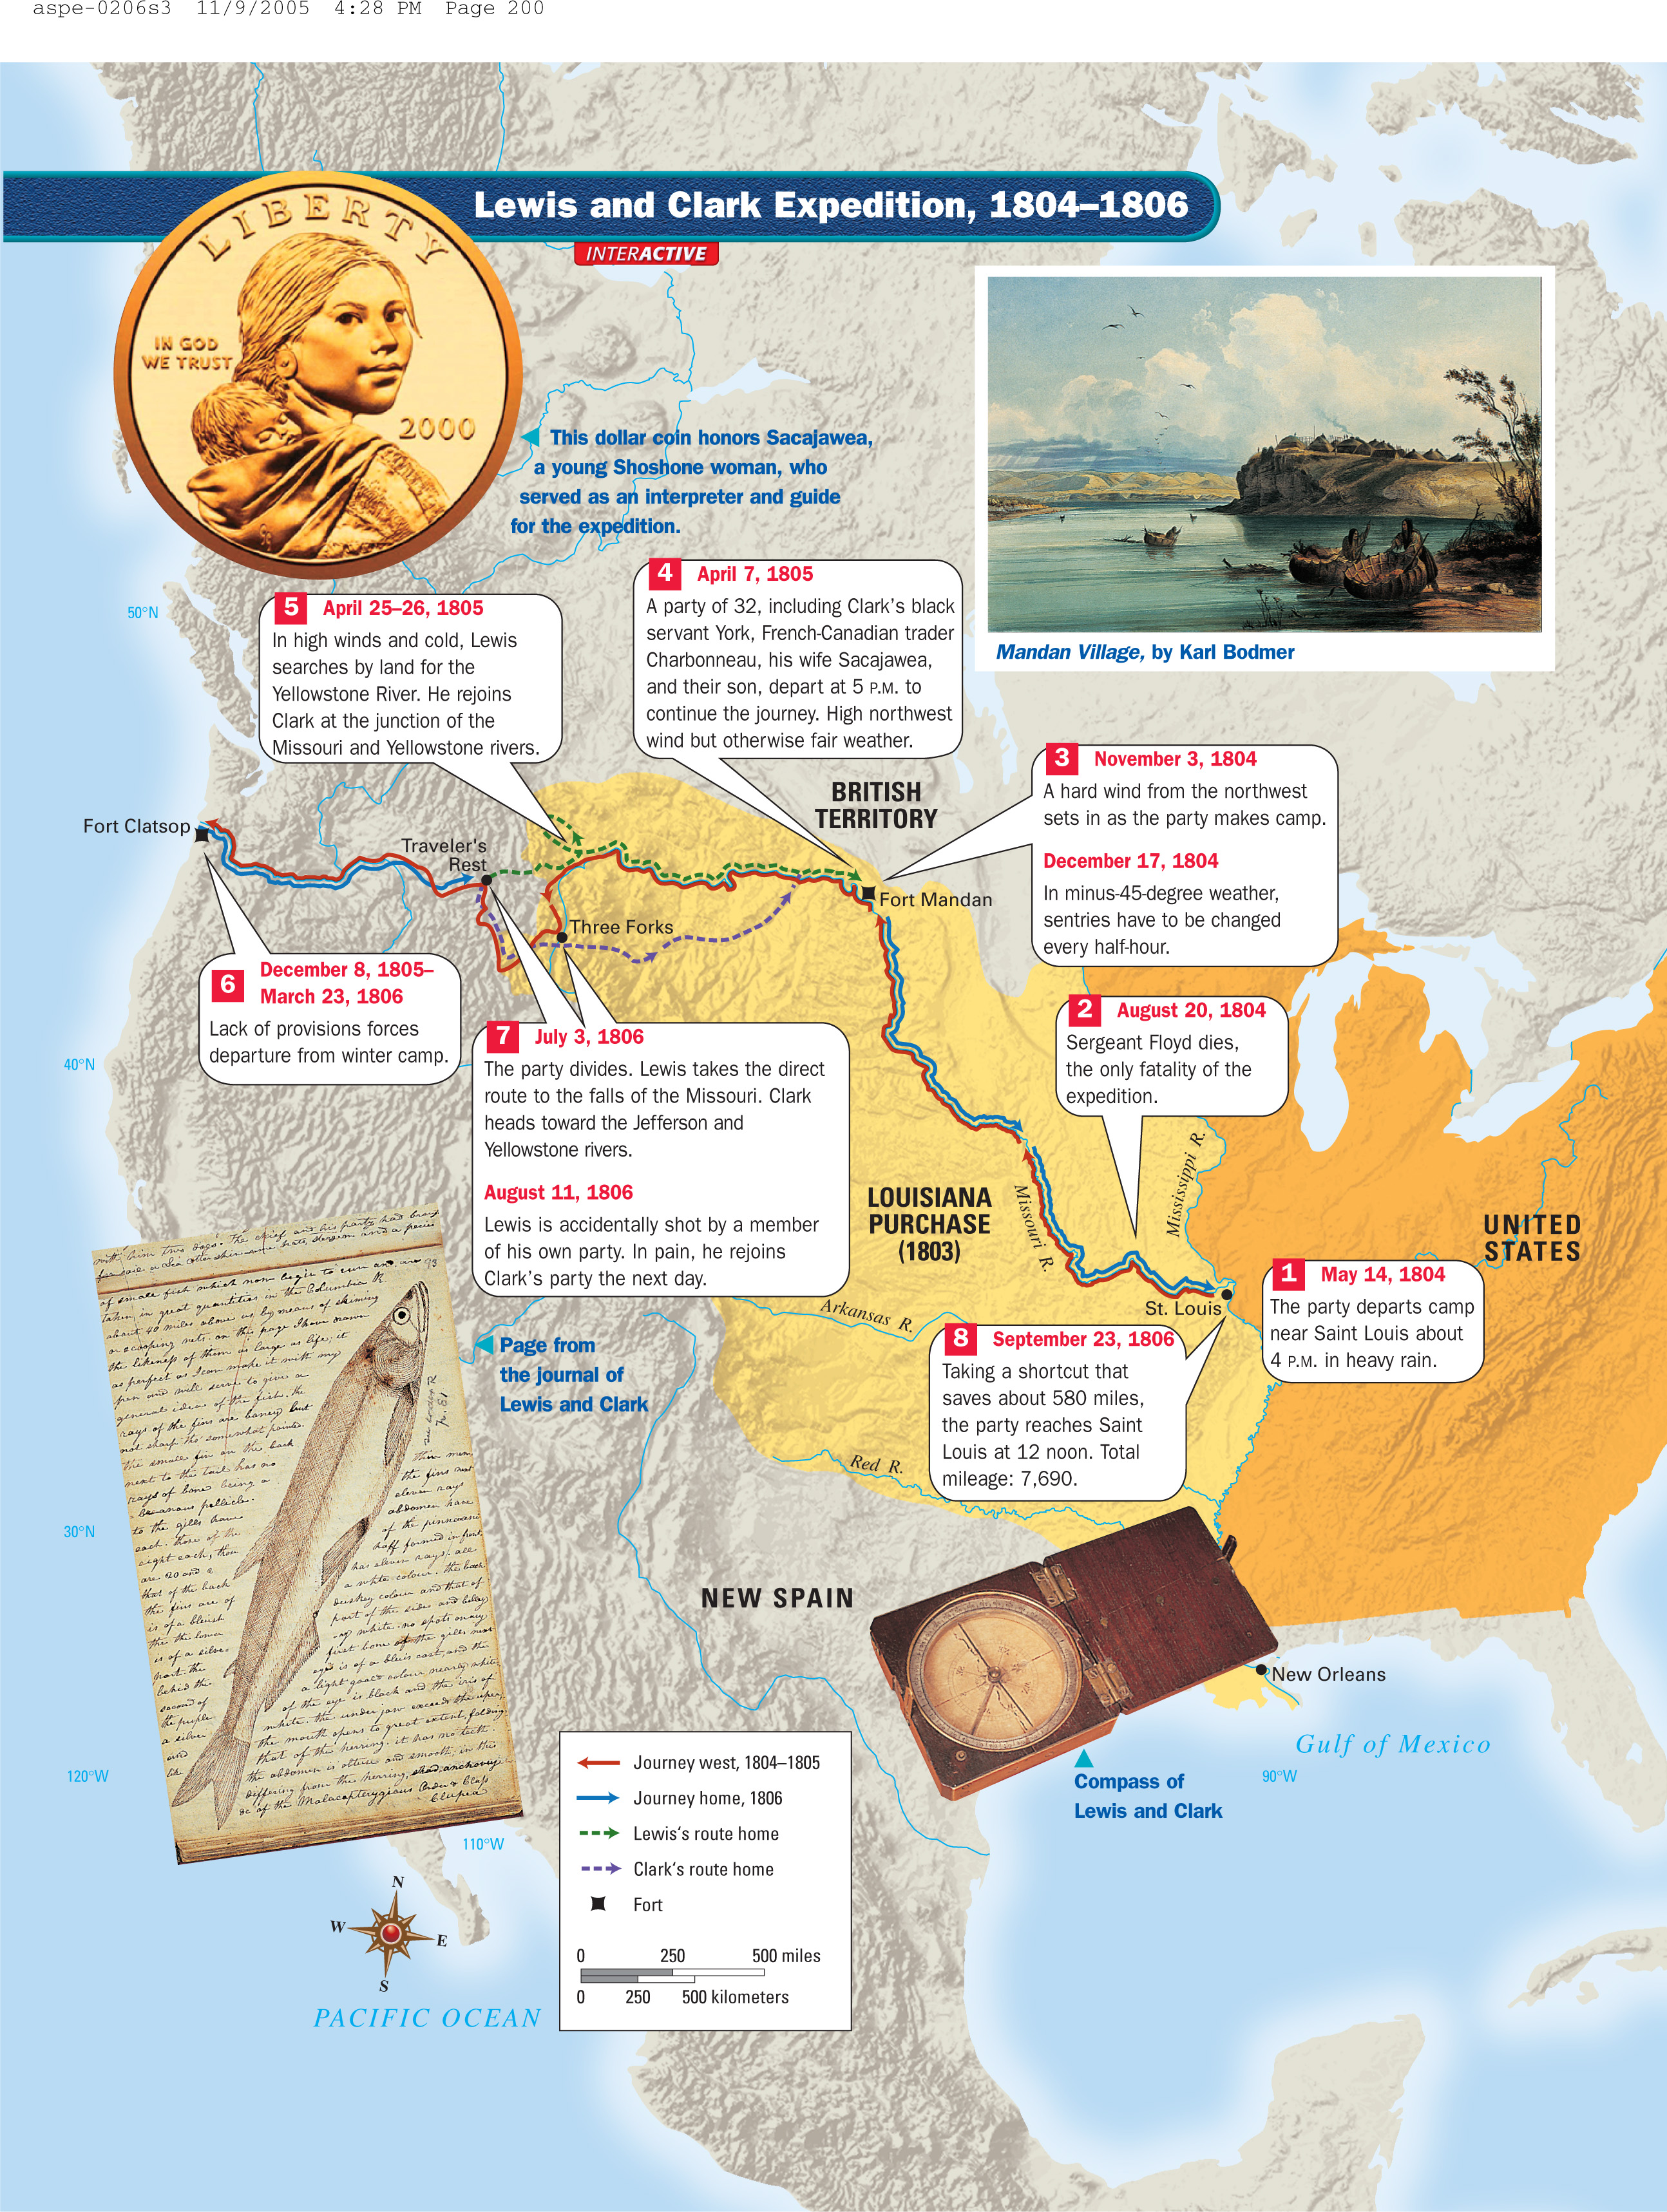 A map shows the path of the Lewis and CLark expedition, 1804-1806. Images added to the map include a page of a journal, a photo of a compass, and a golden dollar coin.